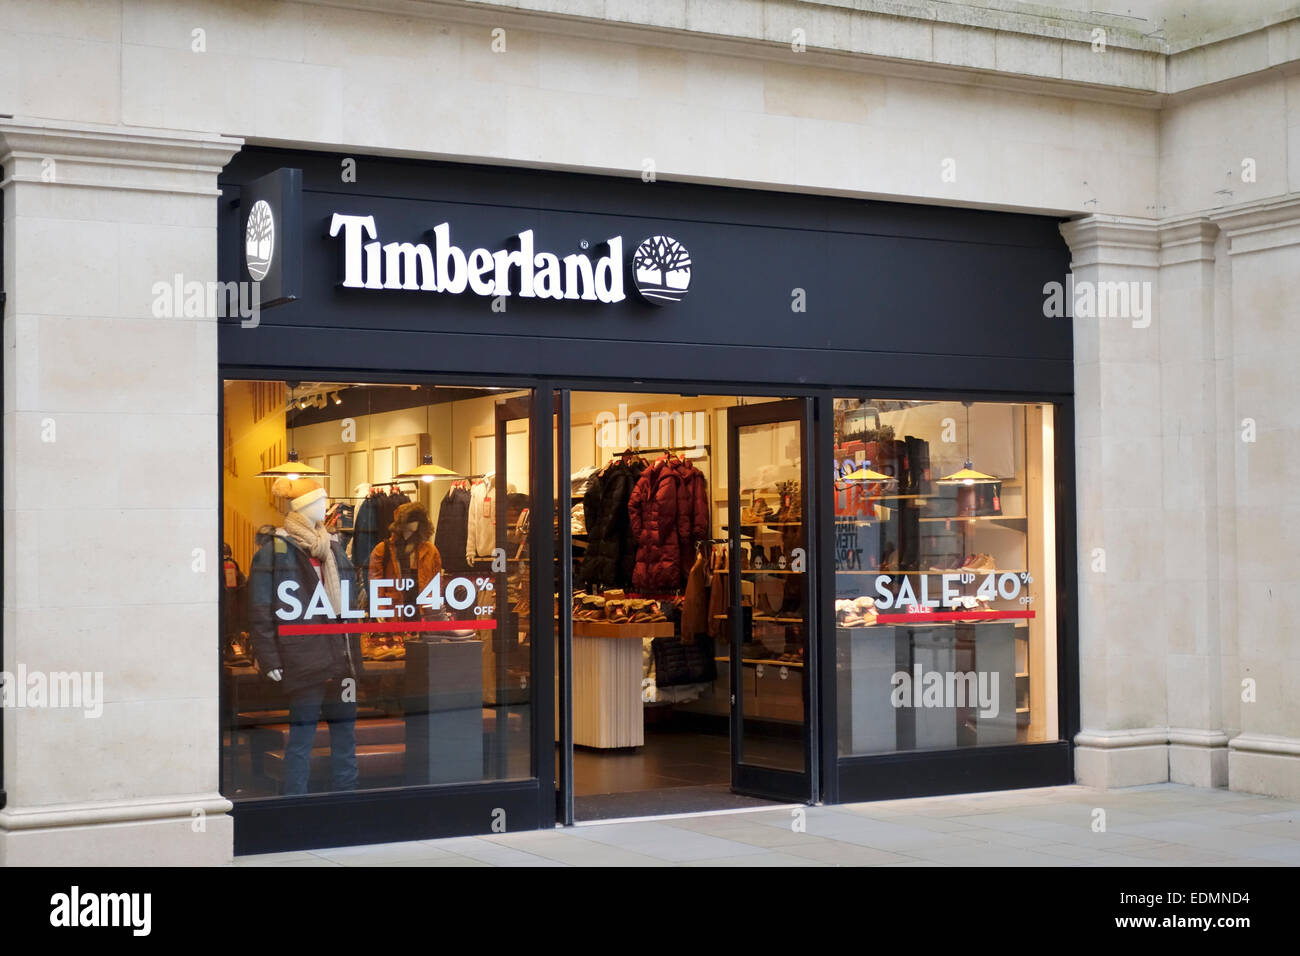 Timberland Store In Woodbury Common Premium Outlet Mall Stock Photo -  Download Image Now - iStock